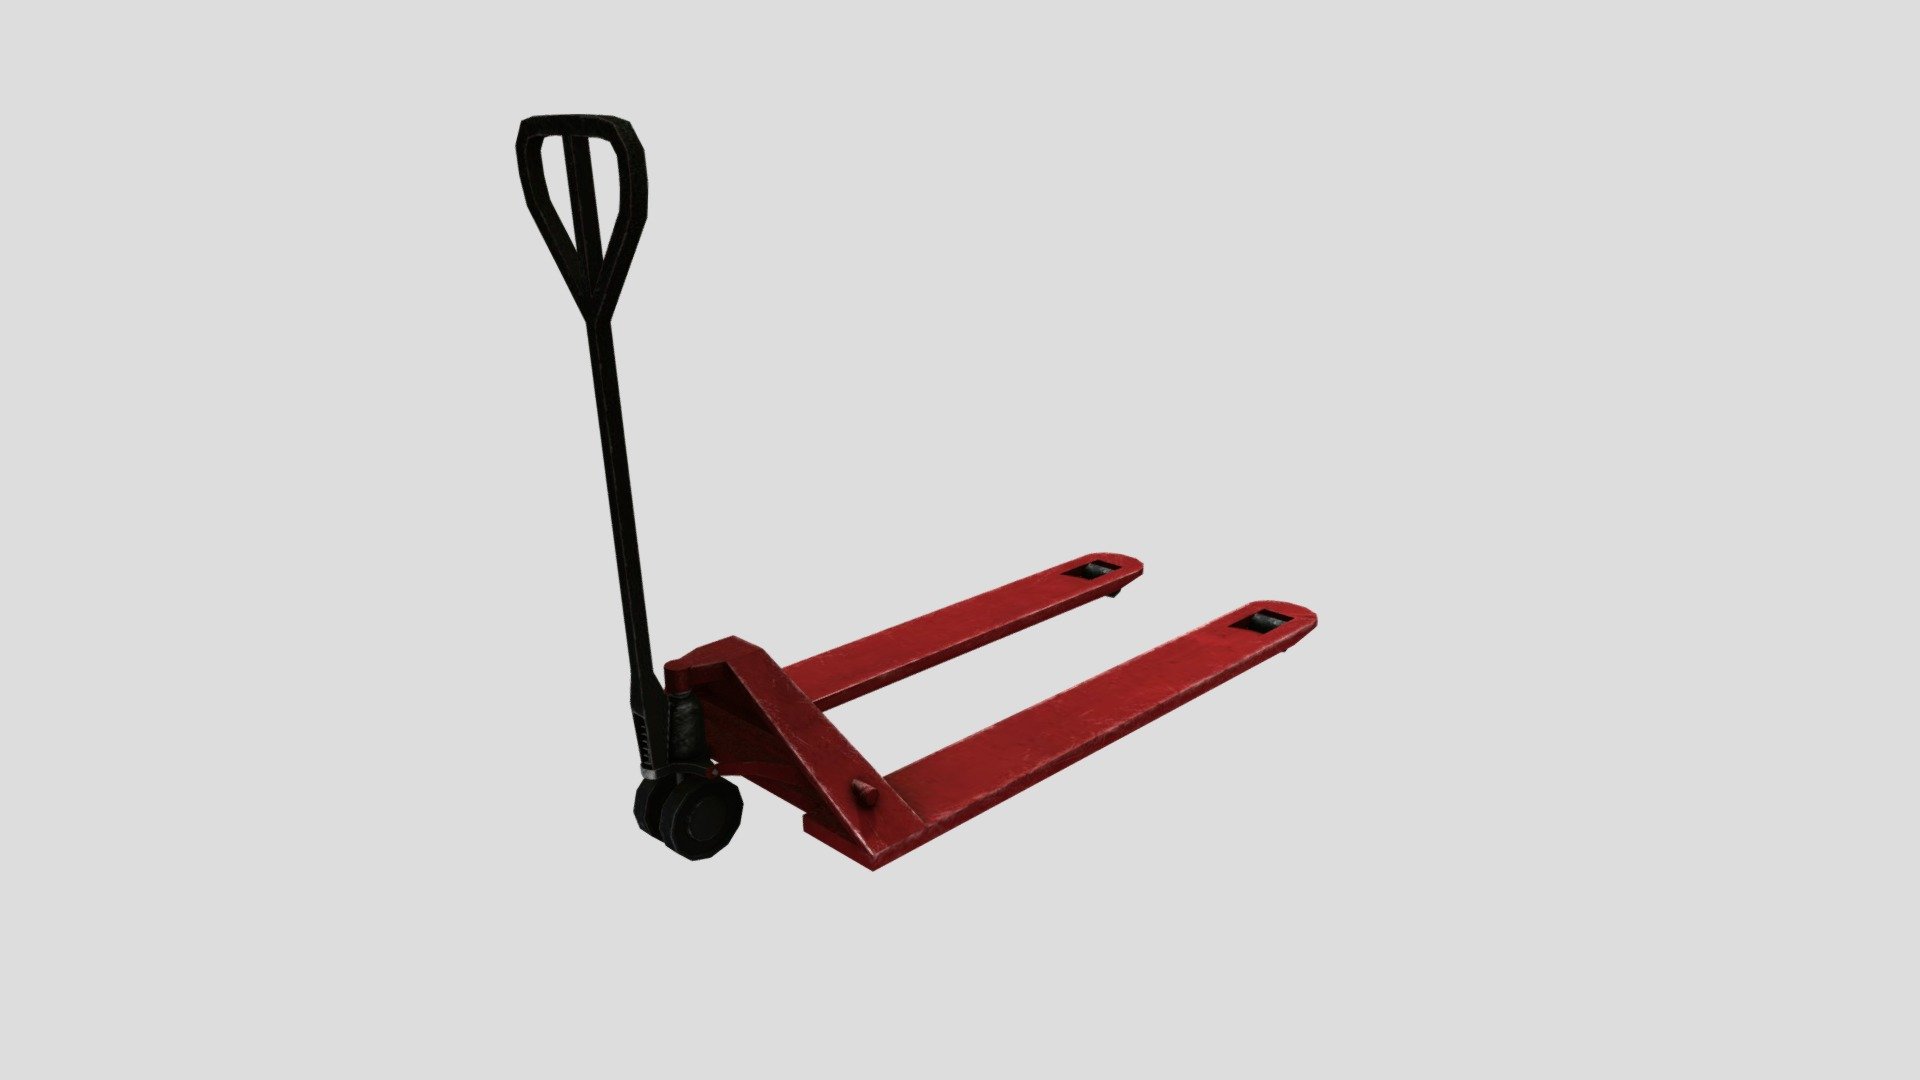 Model is low poly and ready for use in games
Modeled in 3ds Max 2014
Renders are taken from the viewport using metal ray

Specifications
Model:


Pallet Jack has 896 Polys, 975 Verts
Polygons are all quads or tris, no n-gons
Model unwrapped manually to make most efficient use of the UV space
No special plug-ins needed to use this product
All materials and objects named appropriately

Textures:


1024x1024 diffuse, specular and normal maps
All colors are included as diffuse maps
Textures in .jpg format
 - Pallet Jack - Download Free 3D model by Vadya_Rus 3d model